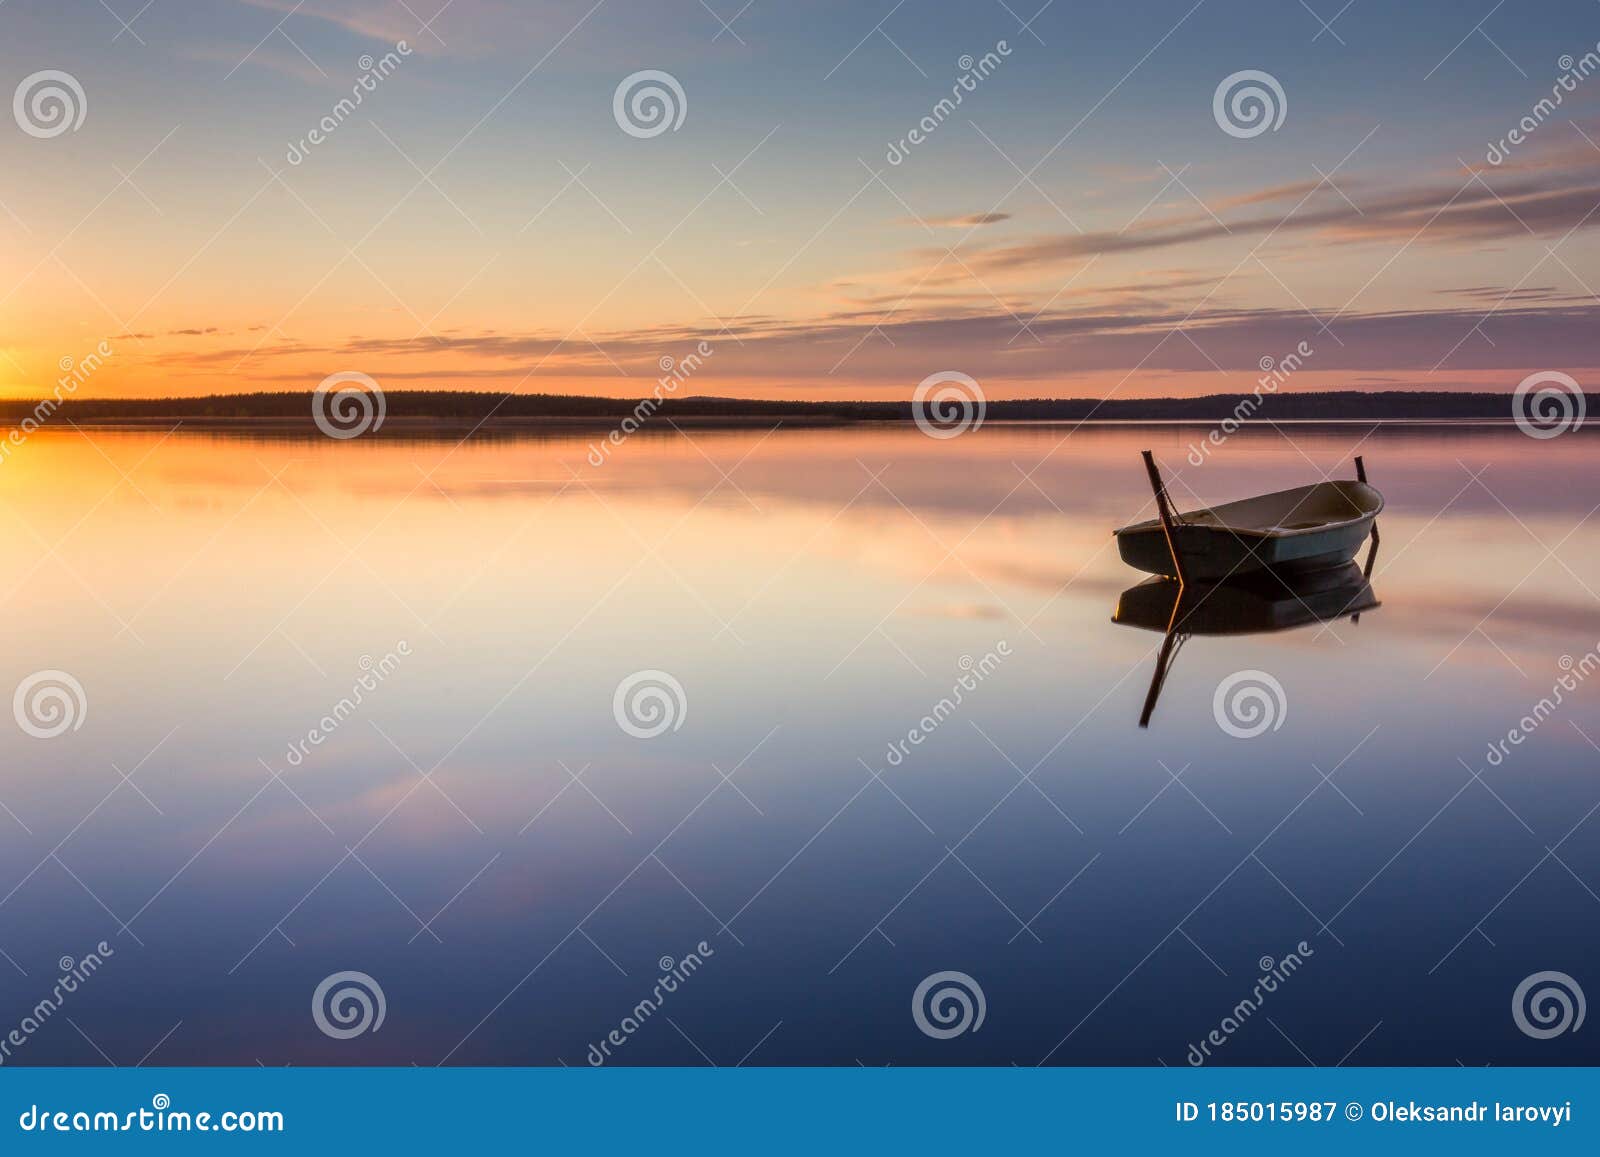 Parking for Small Fishing Boats on the Lake during Sunset